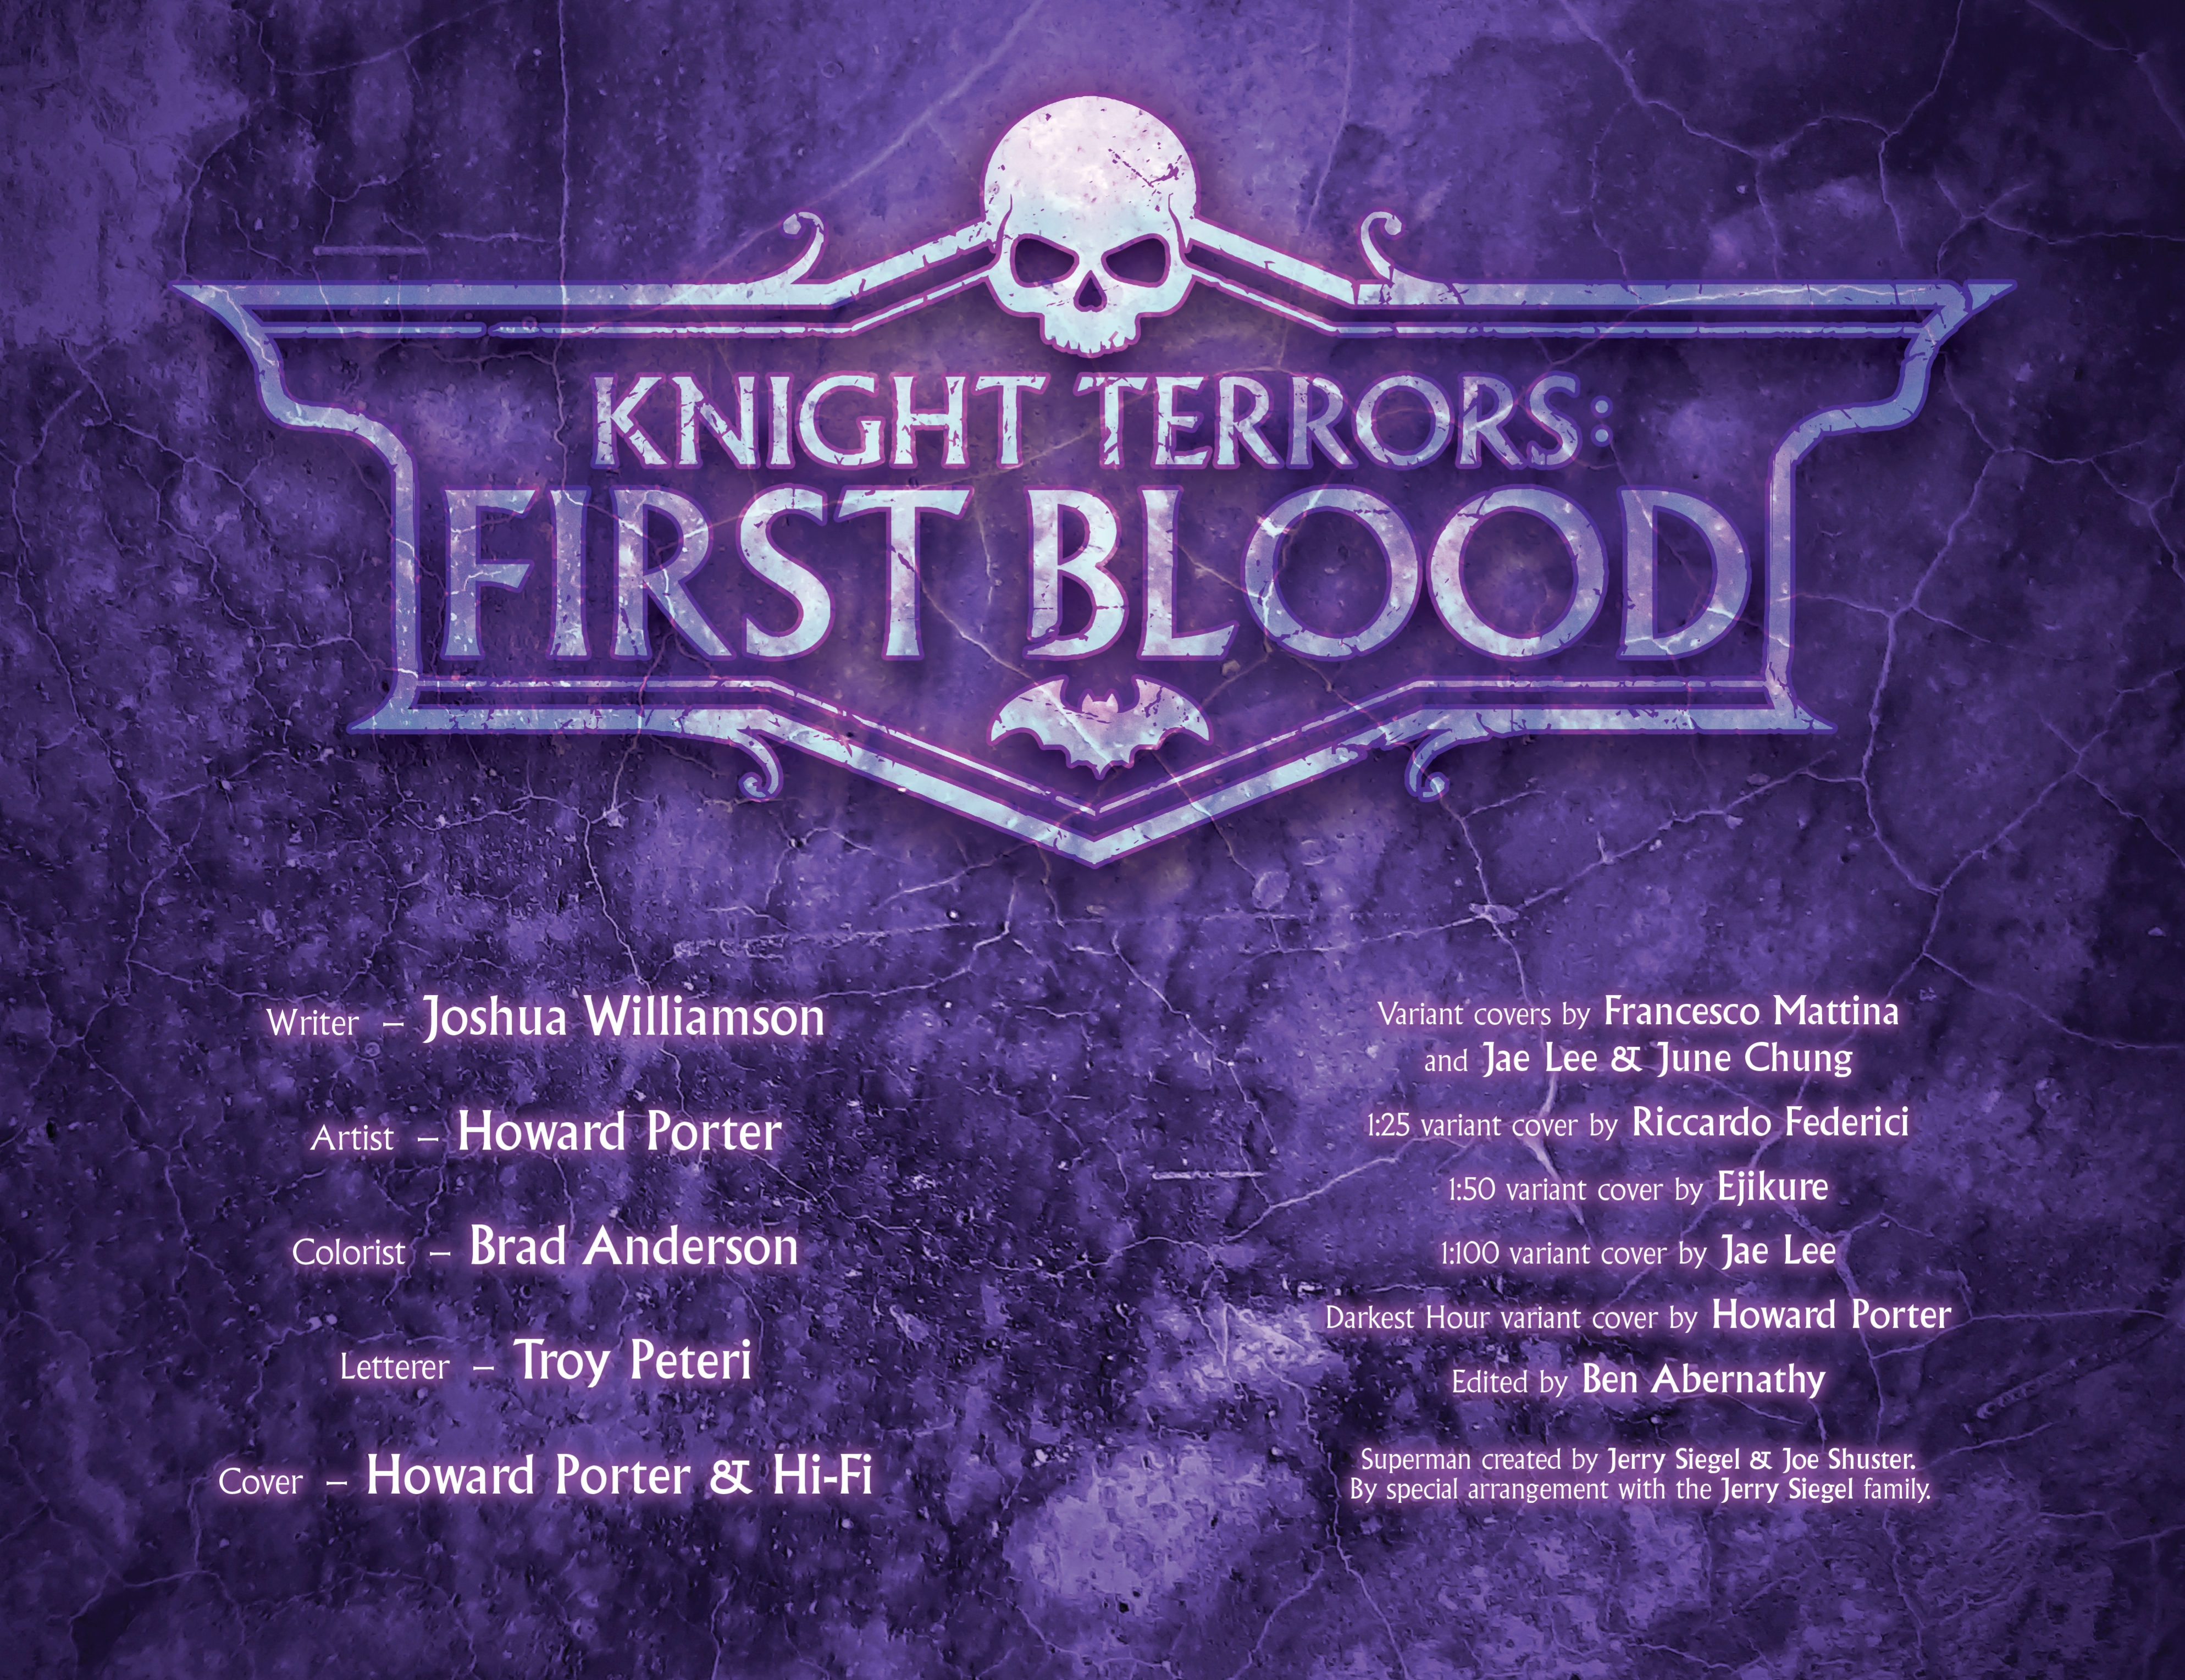 Read online Knight Terrors Collection comic -  Issue # First Blood - 9